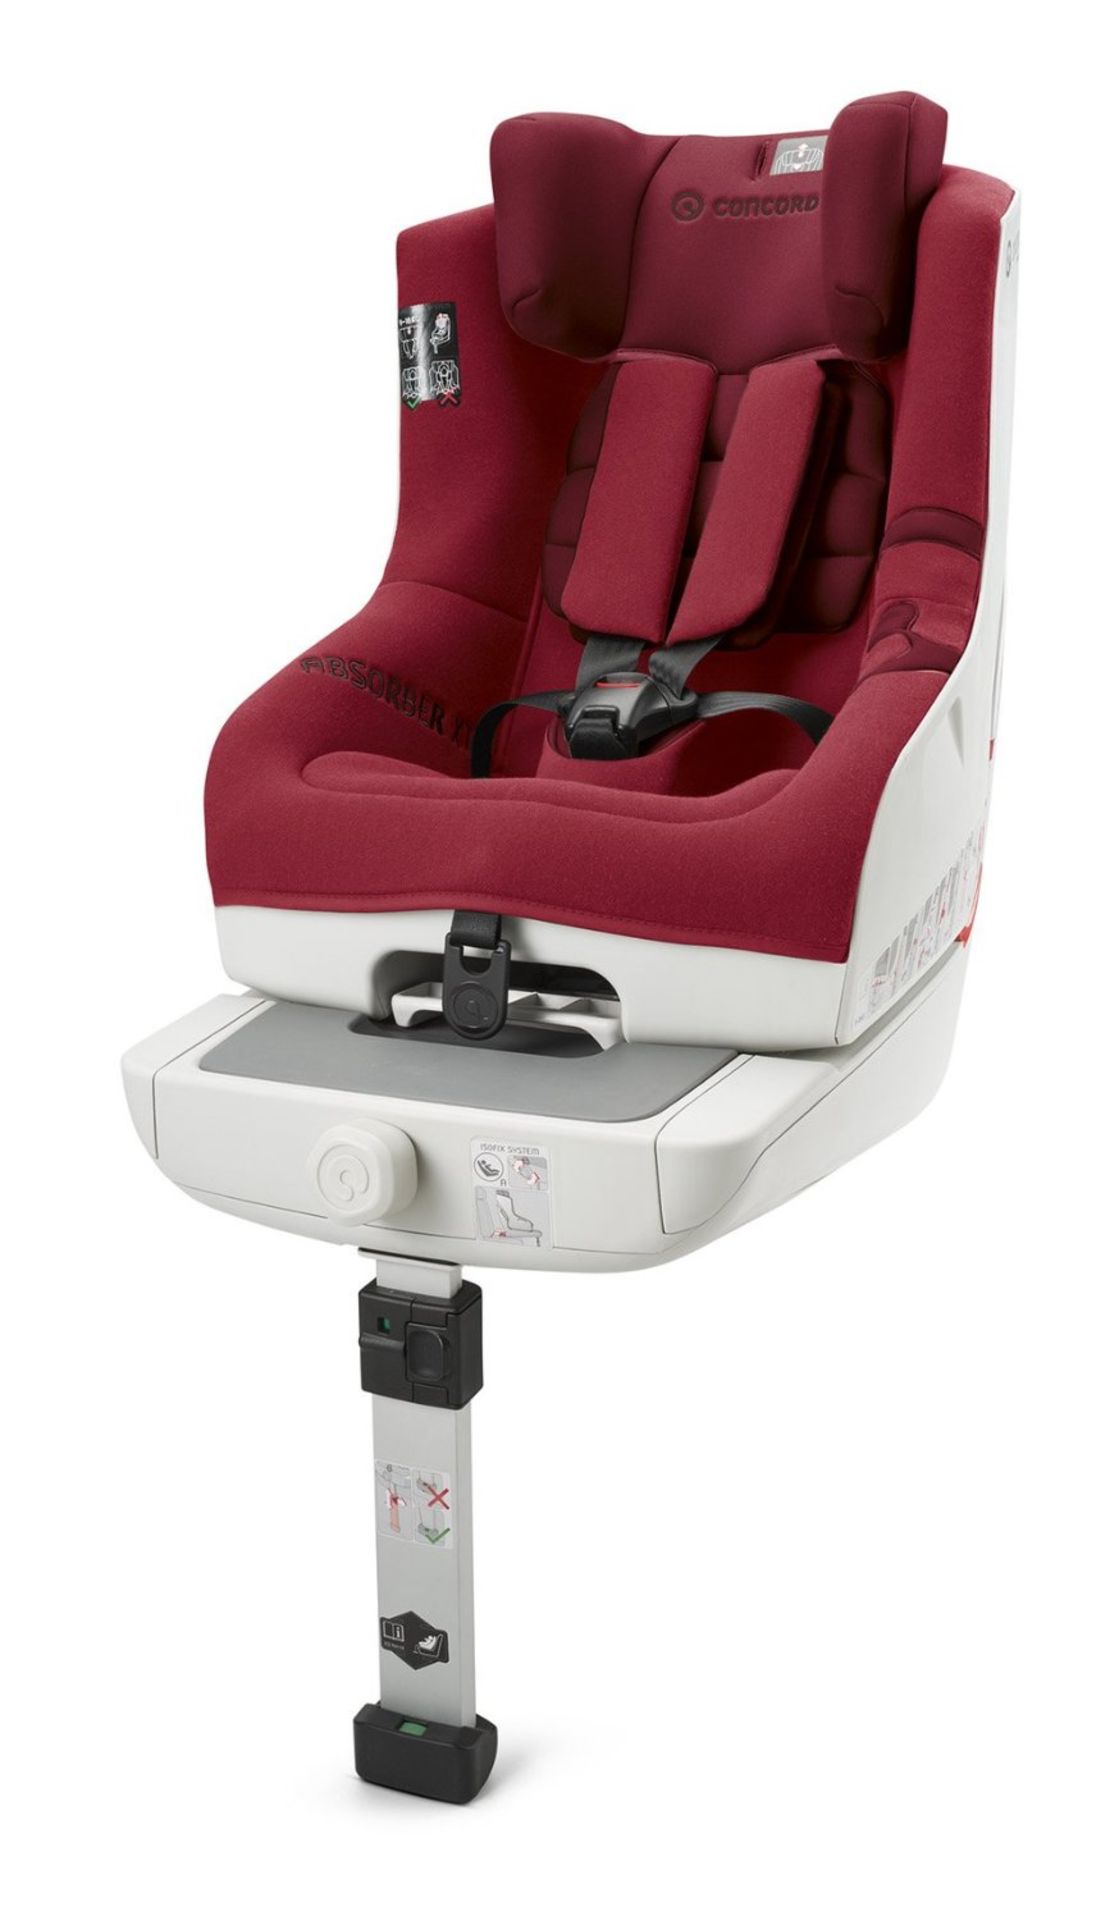 BRAND NEW Concord Absorber XT Car Seat (Group 1, Ruby Red) RRP £299.99